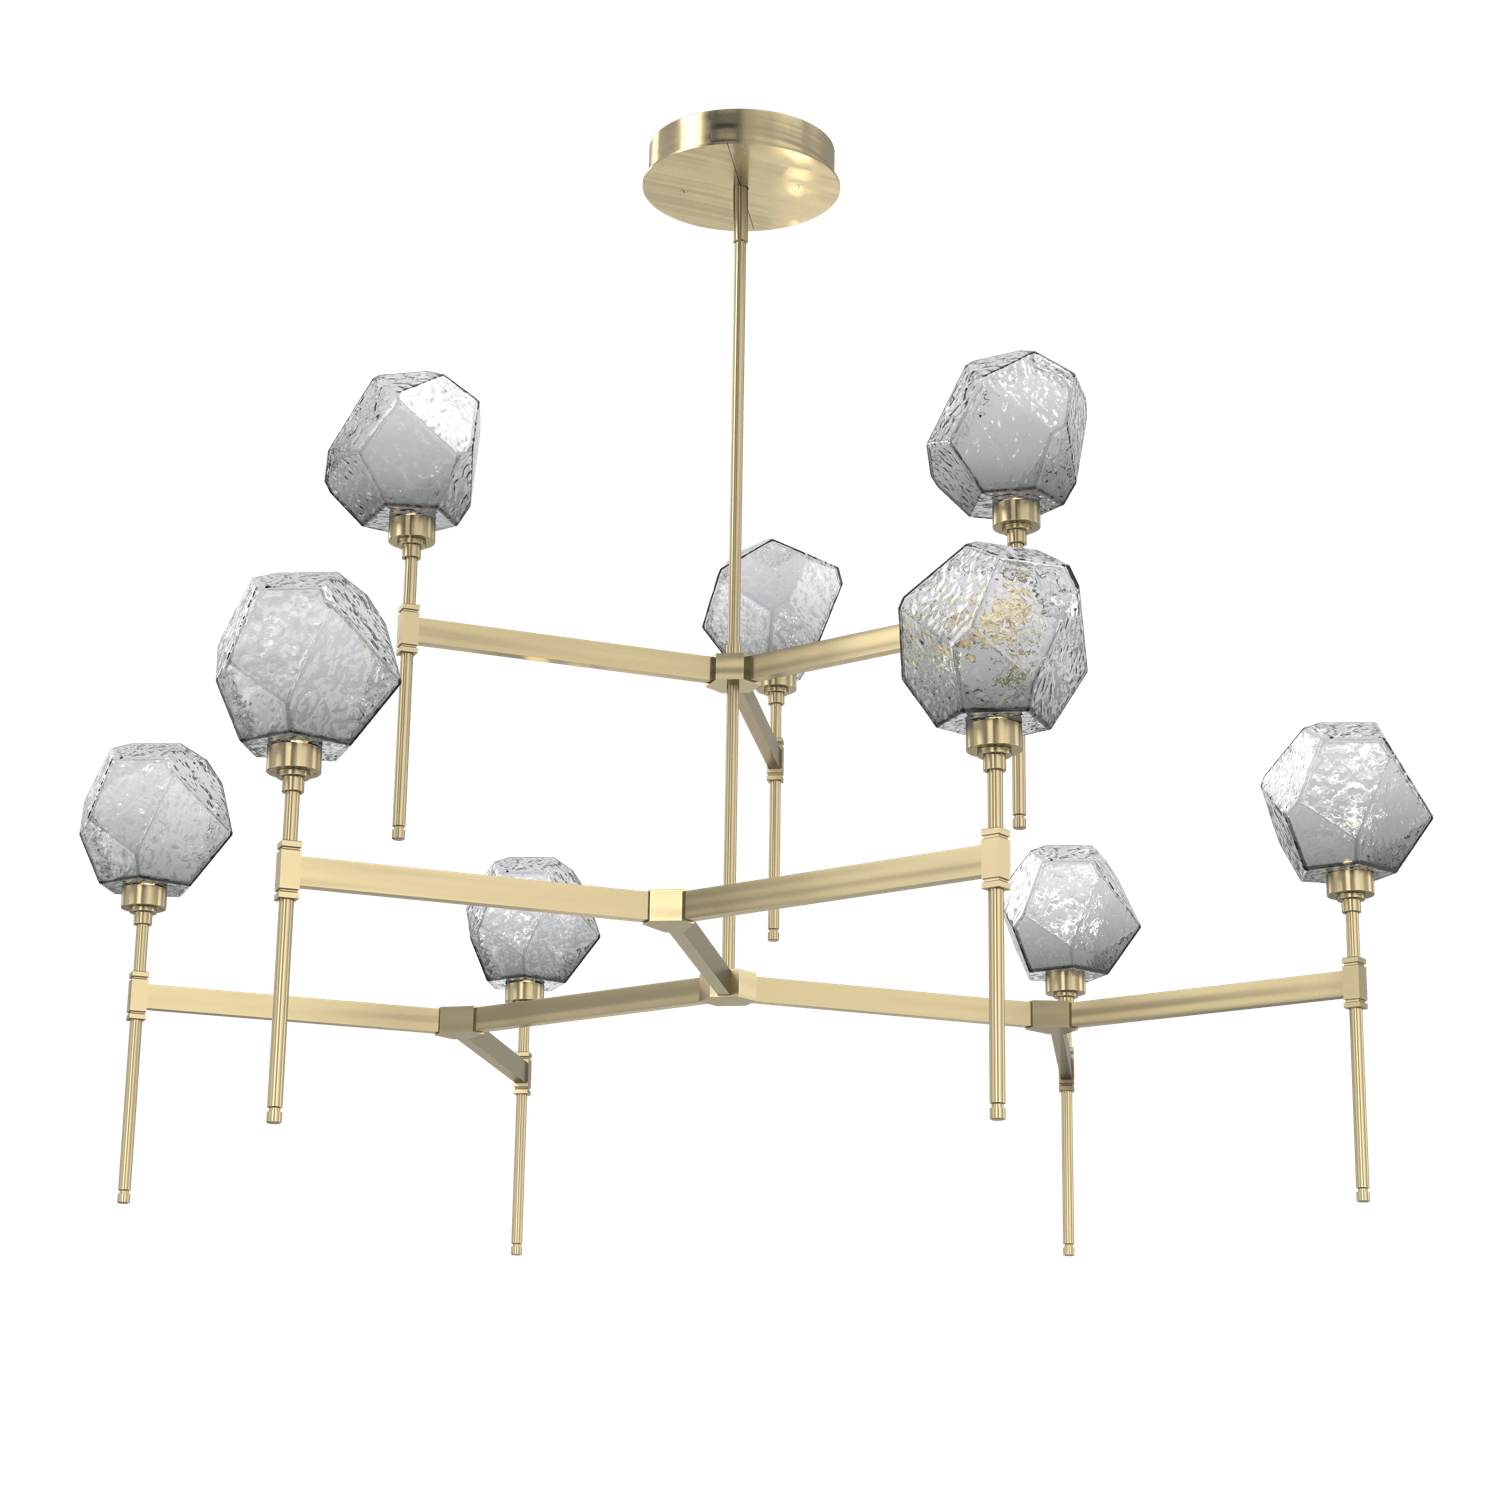 CHB0039-55-HB-S-Hammerton-Studio-Gem-round-two-tier-belvedere-chandelier-with-heritage-brass-finish-and-smoke-blown-glass-shades-and-LED-lamping